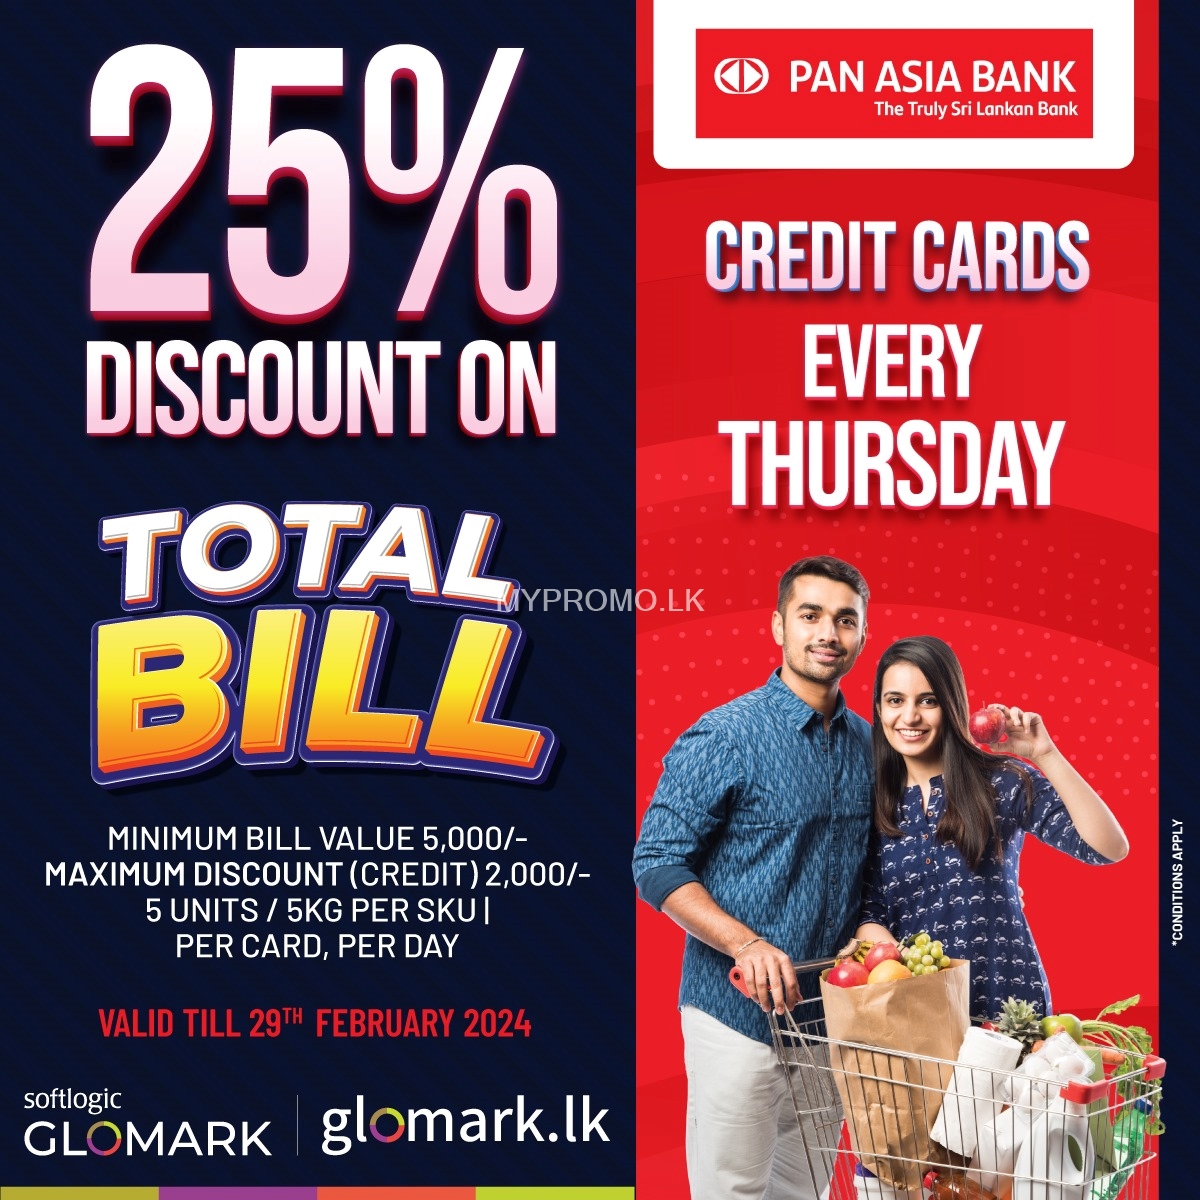 Enjoy 25% DISCOUNT on TOTAL BILL with PAN ASIA Bank Credit Cards at Softlogic GLOMARK